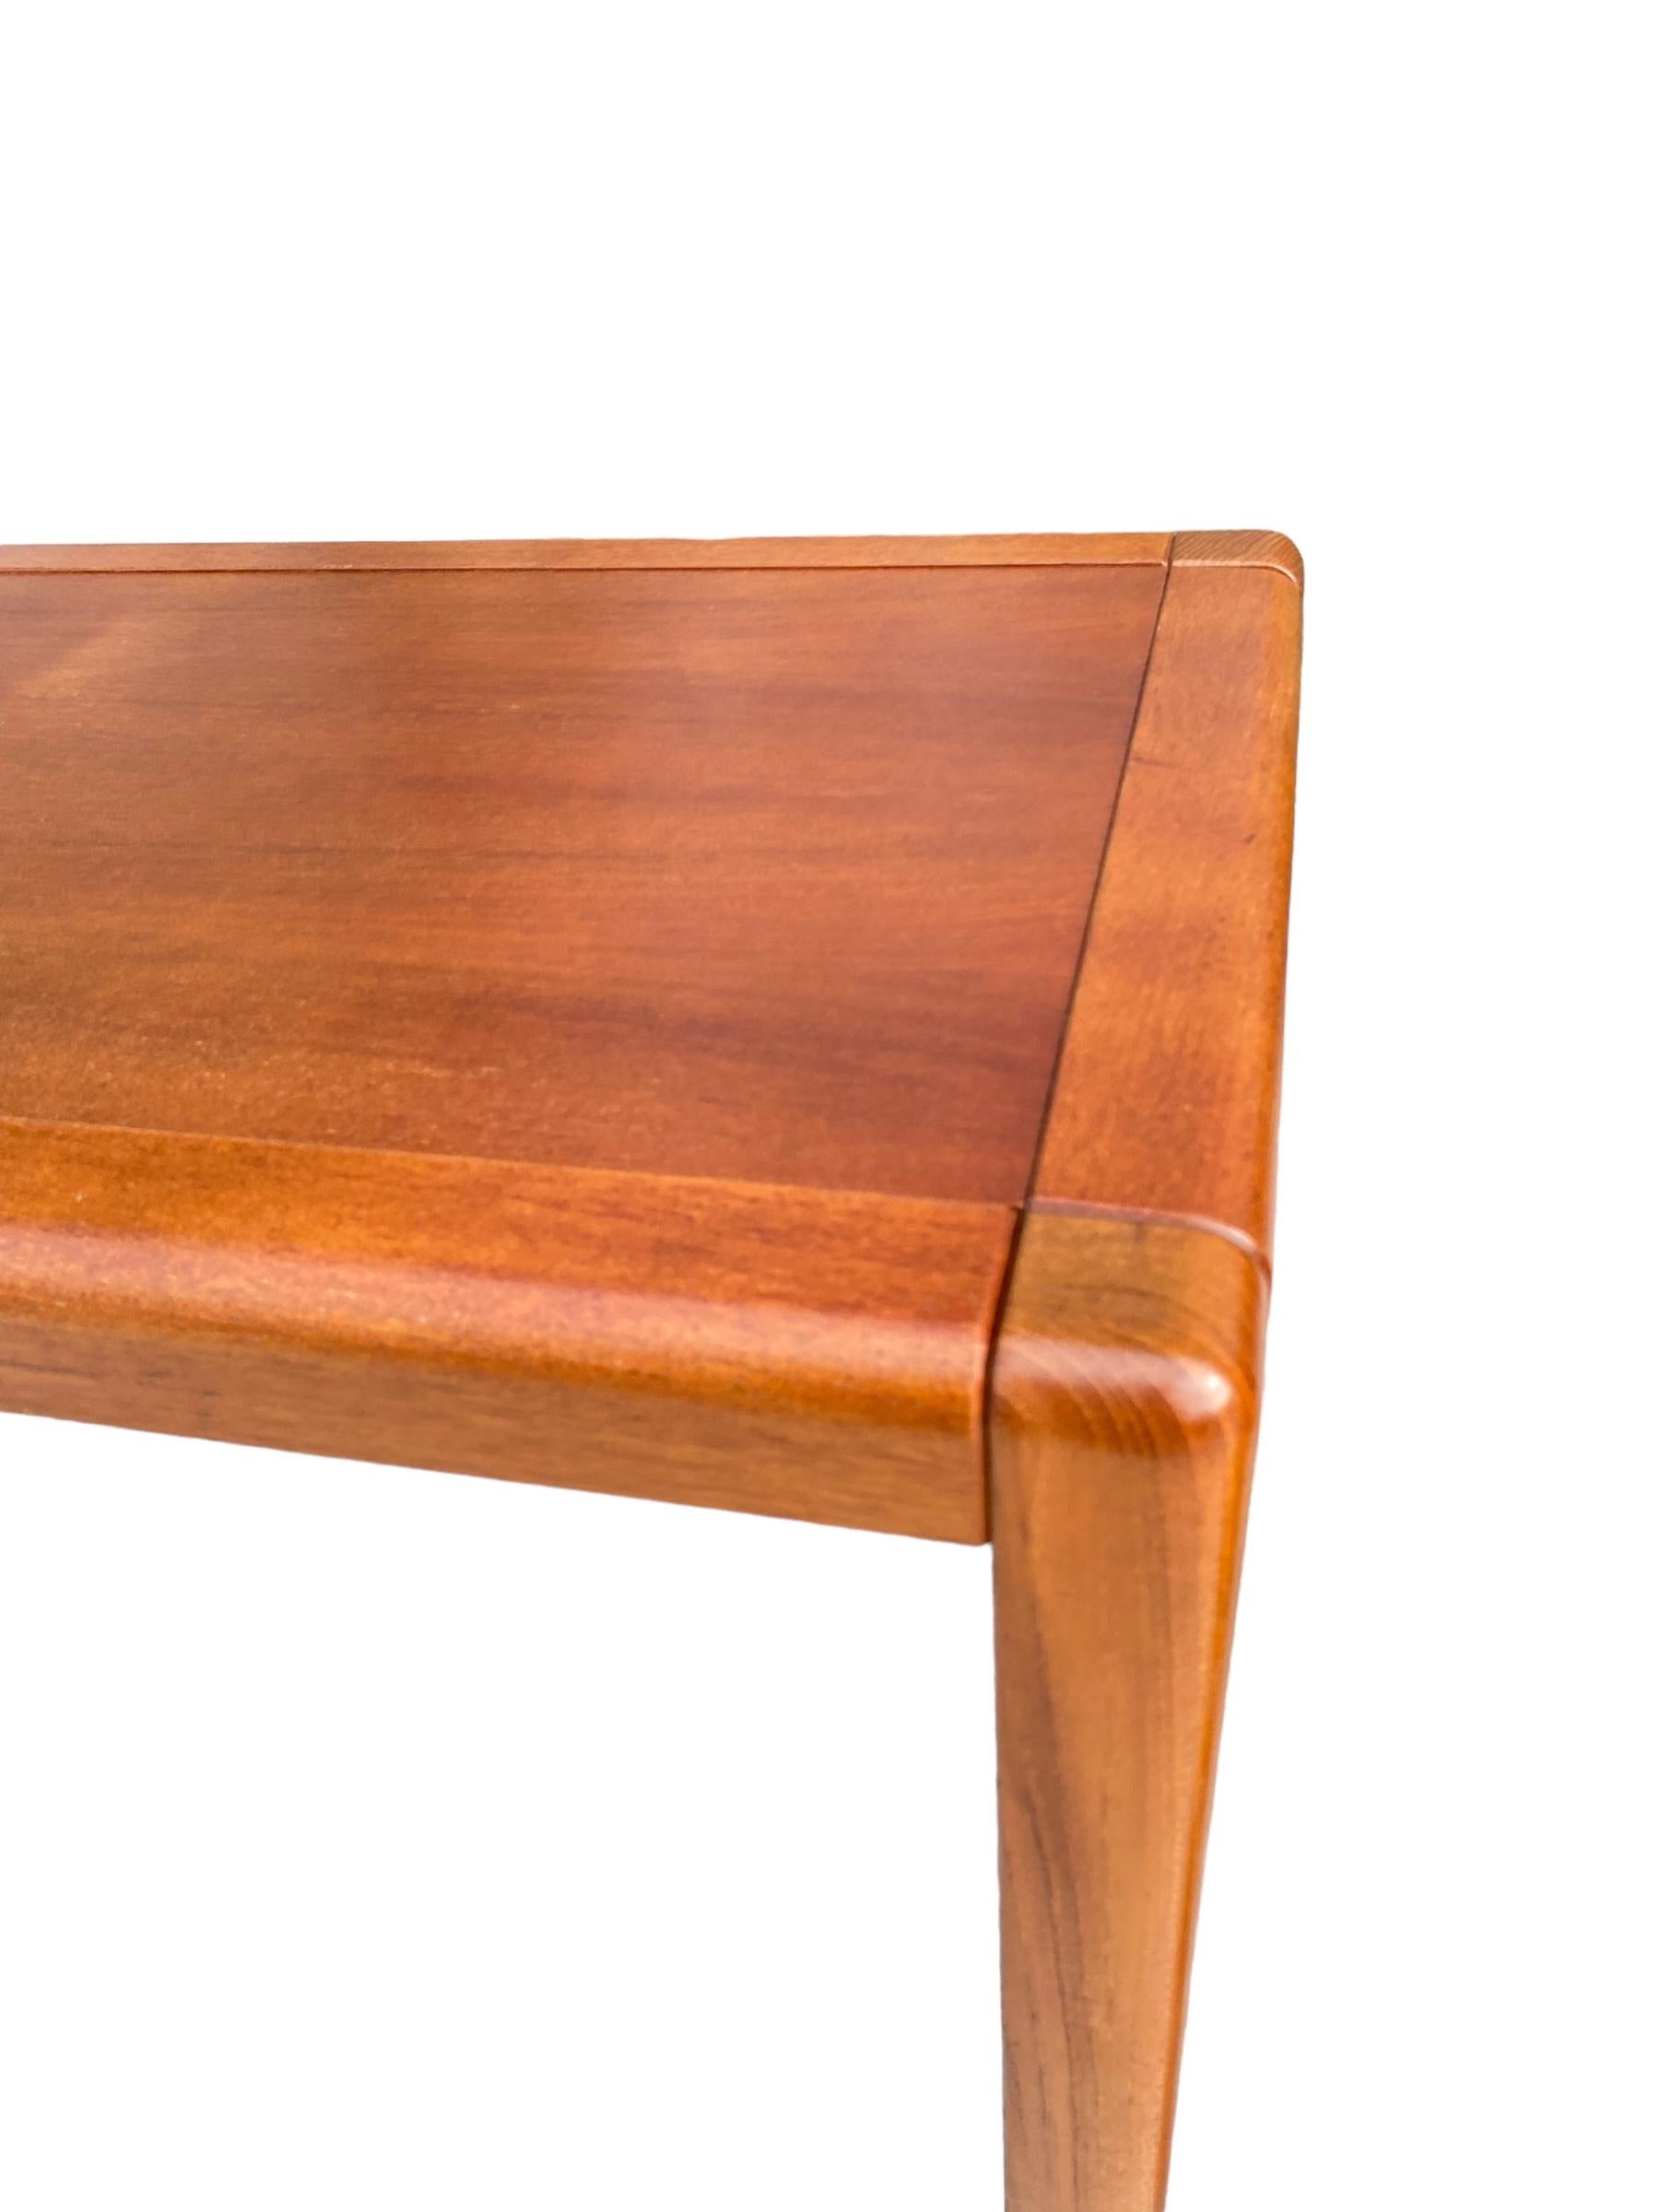 Late 20th Century Danish Teak End Tables For Sale